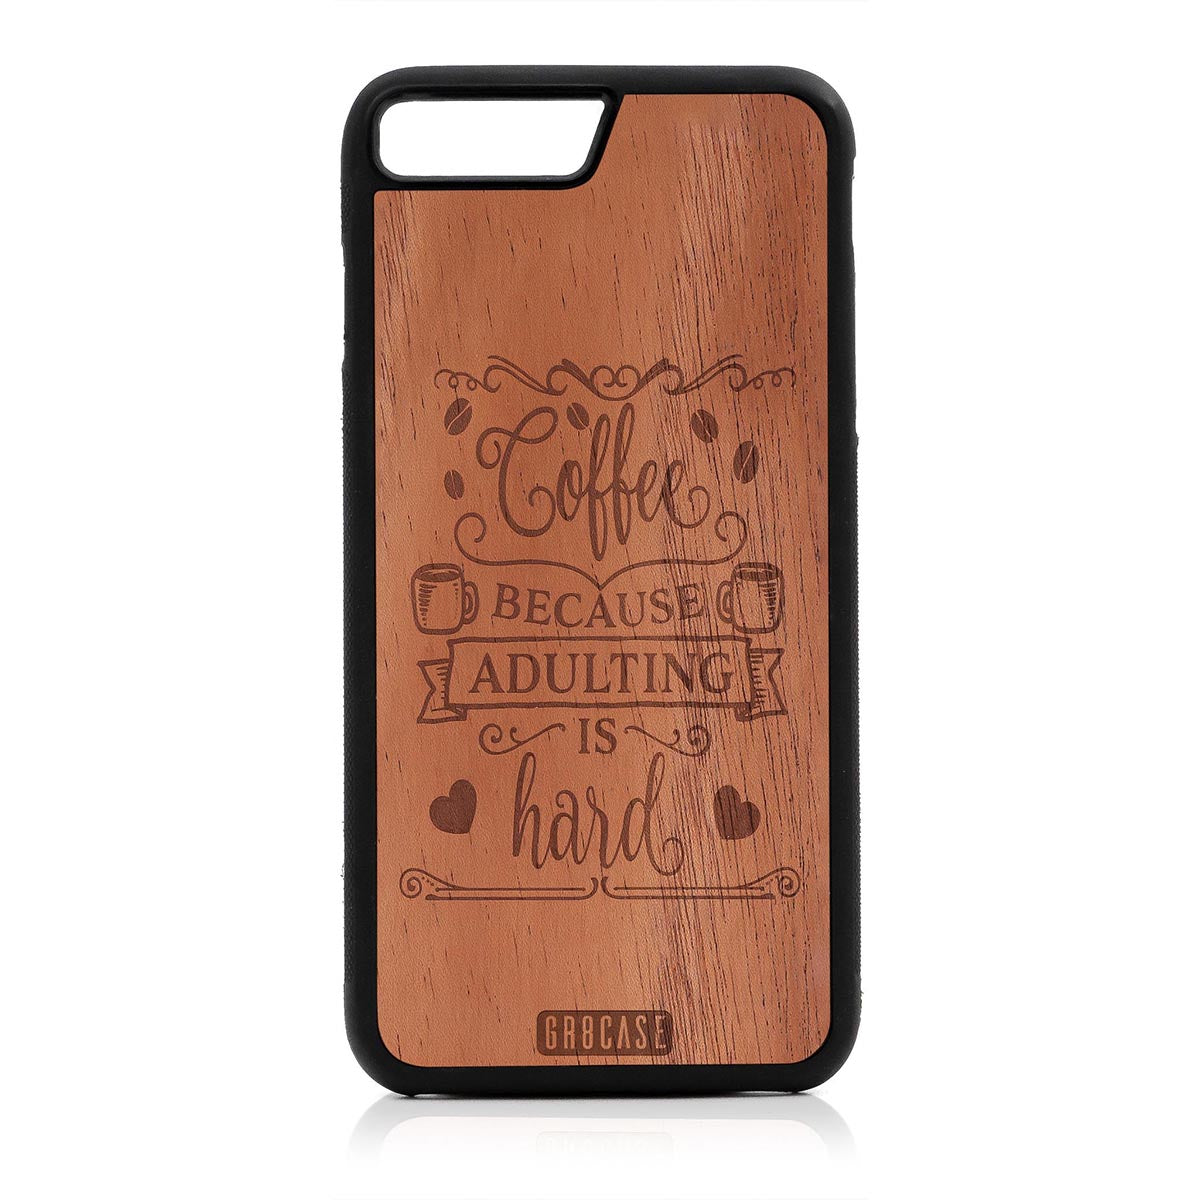 Coffee Because Adulting Is Hard Design Wood Case For iPhone 7 Plus / 8 Plus by GR8CASE